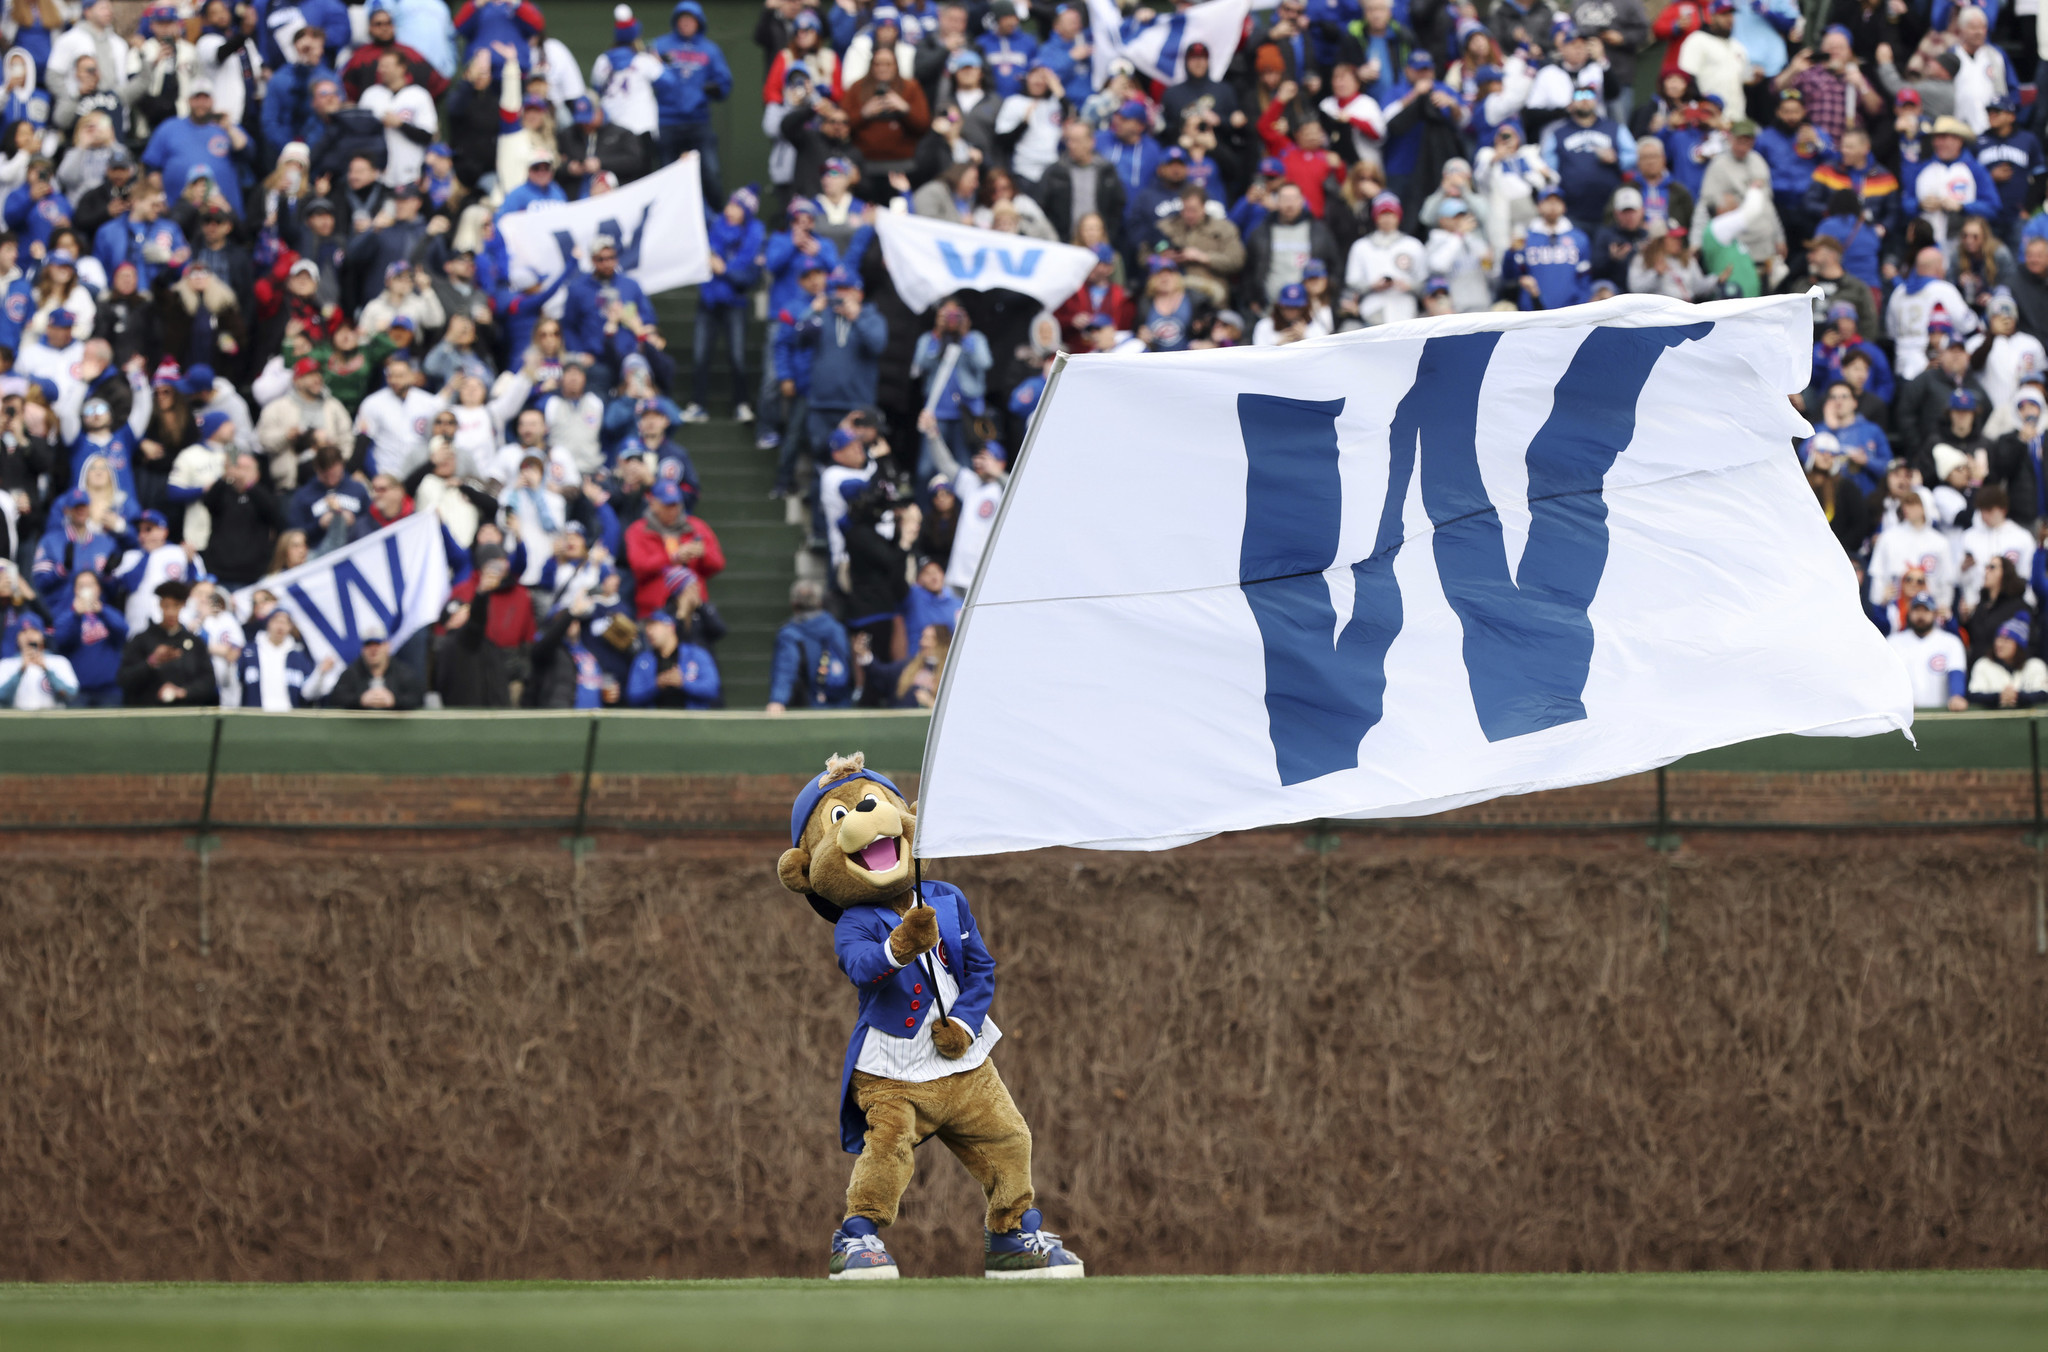 Pirates or Cubs: Who will wave victory flag tonight?